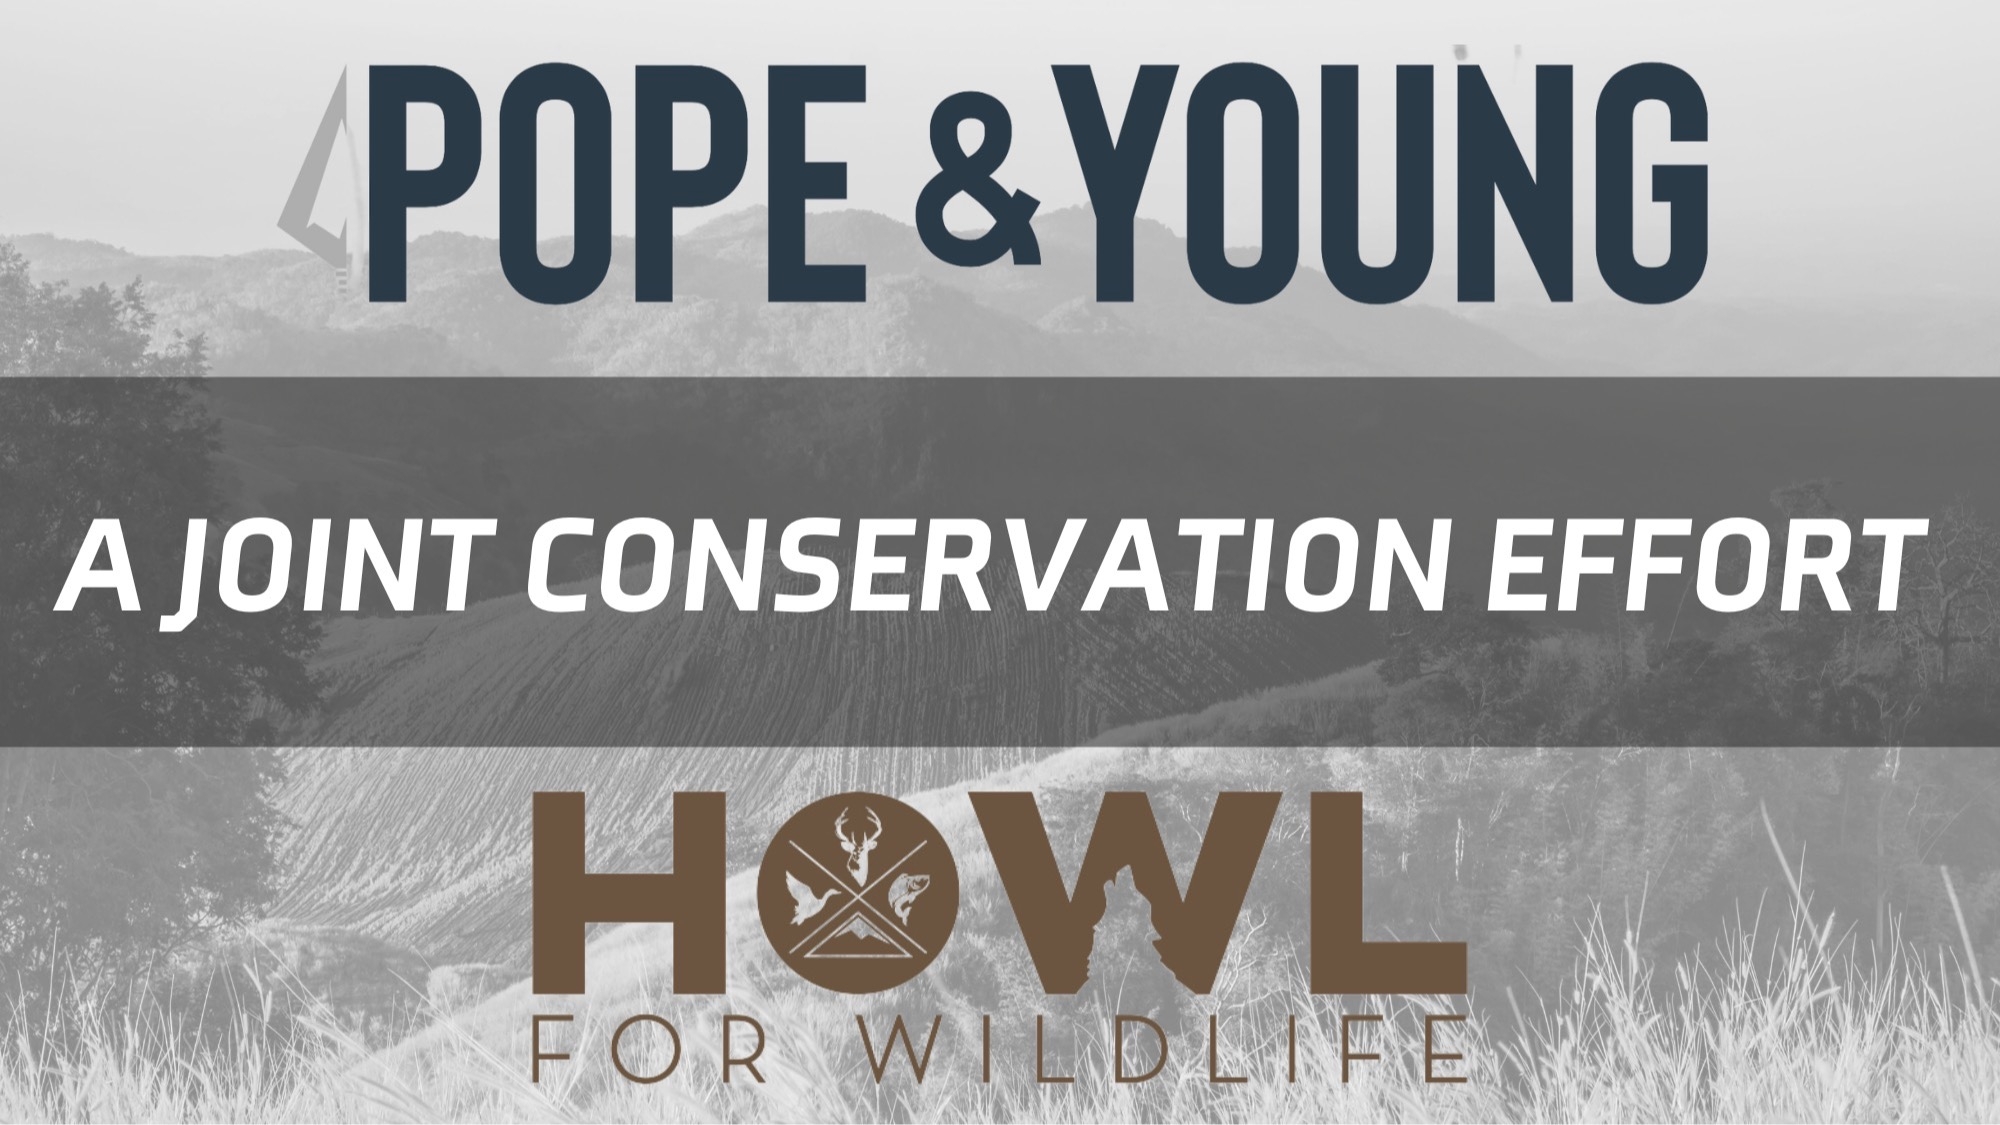 
Pope and Young Joins Forces with Howl for Wildlife for Conservation Efforts 